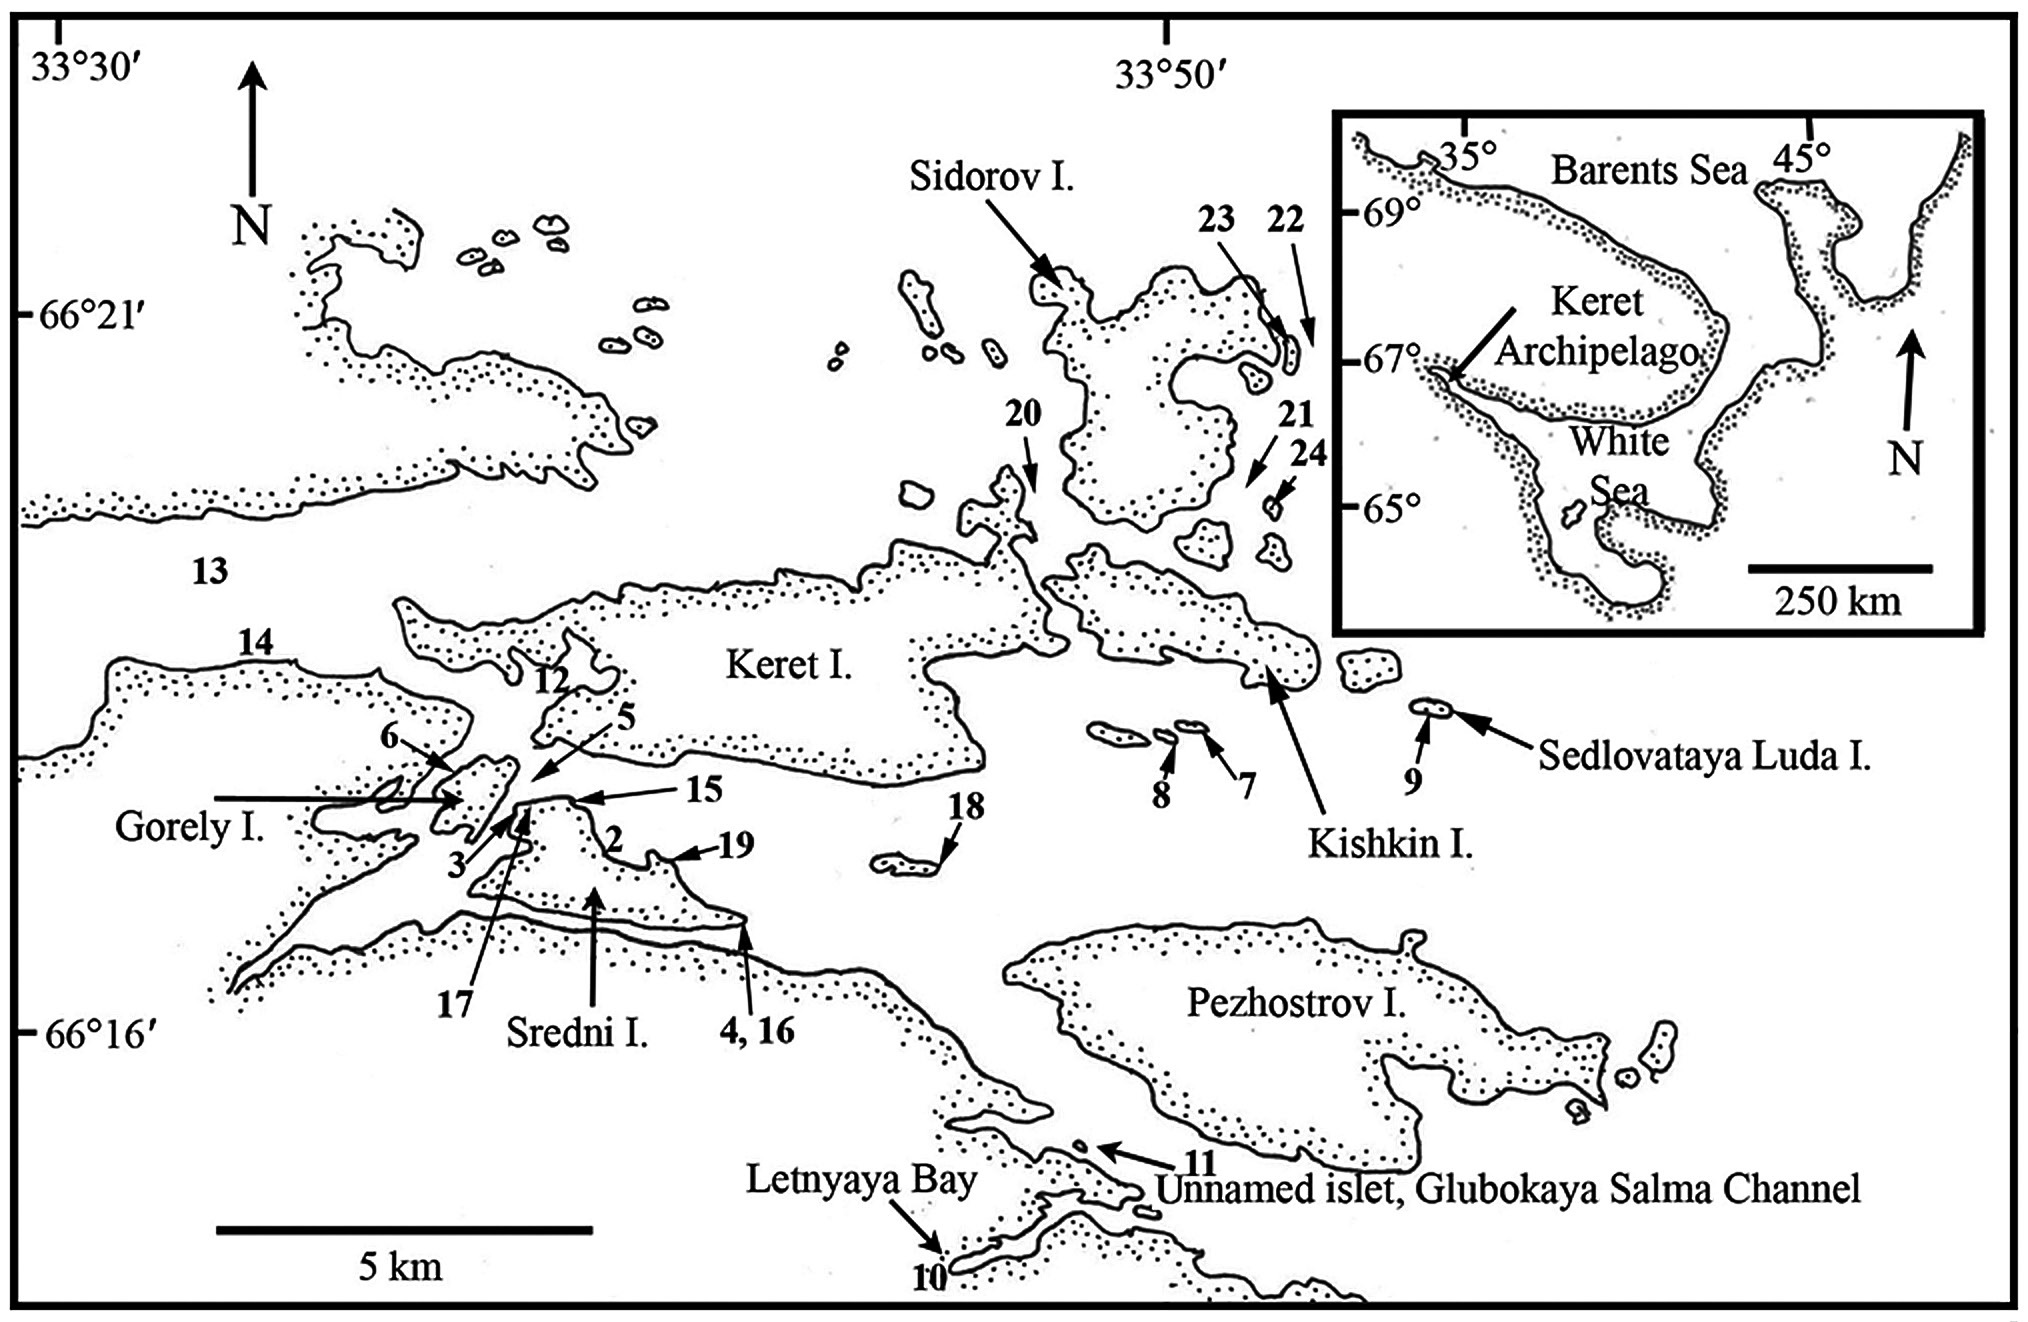 Map of northwestern Russia showing location of Keret Archipelago in the White Sea (A) with enlargement of Keret Archipelago (B) showing primary collection sites. Site 1 (Chupa) is off the map to the west in the channel indicated by site 13.